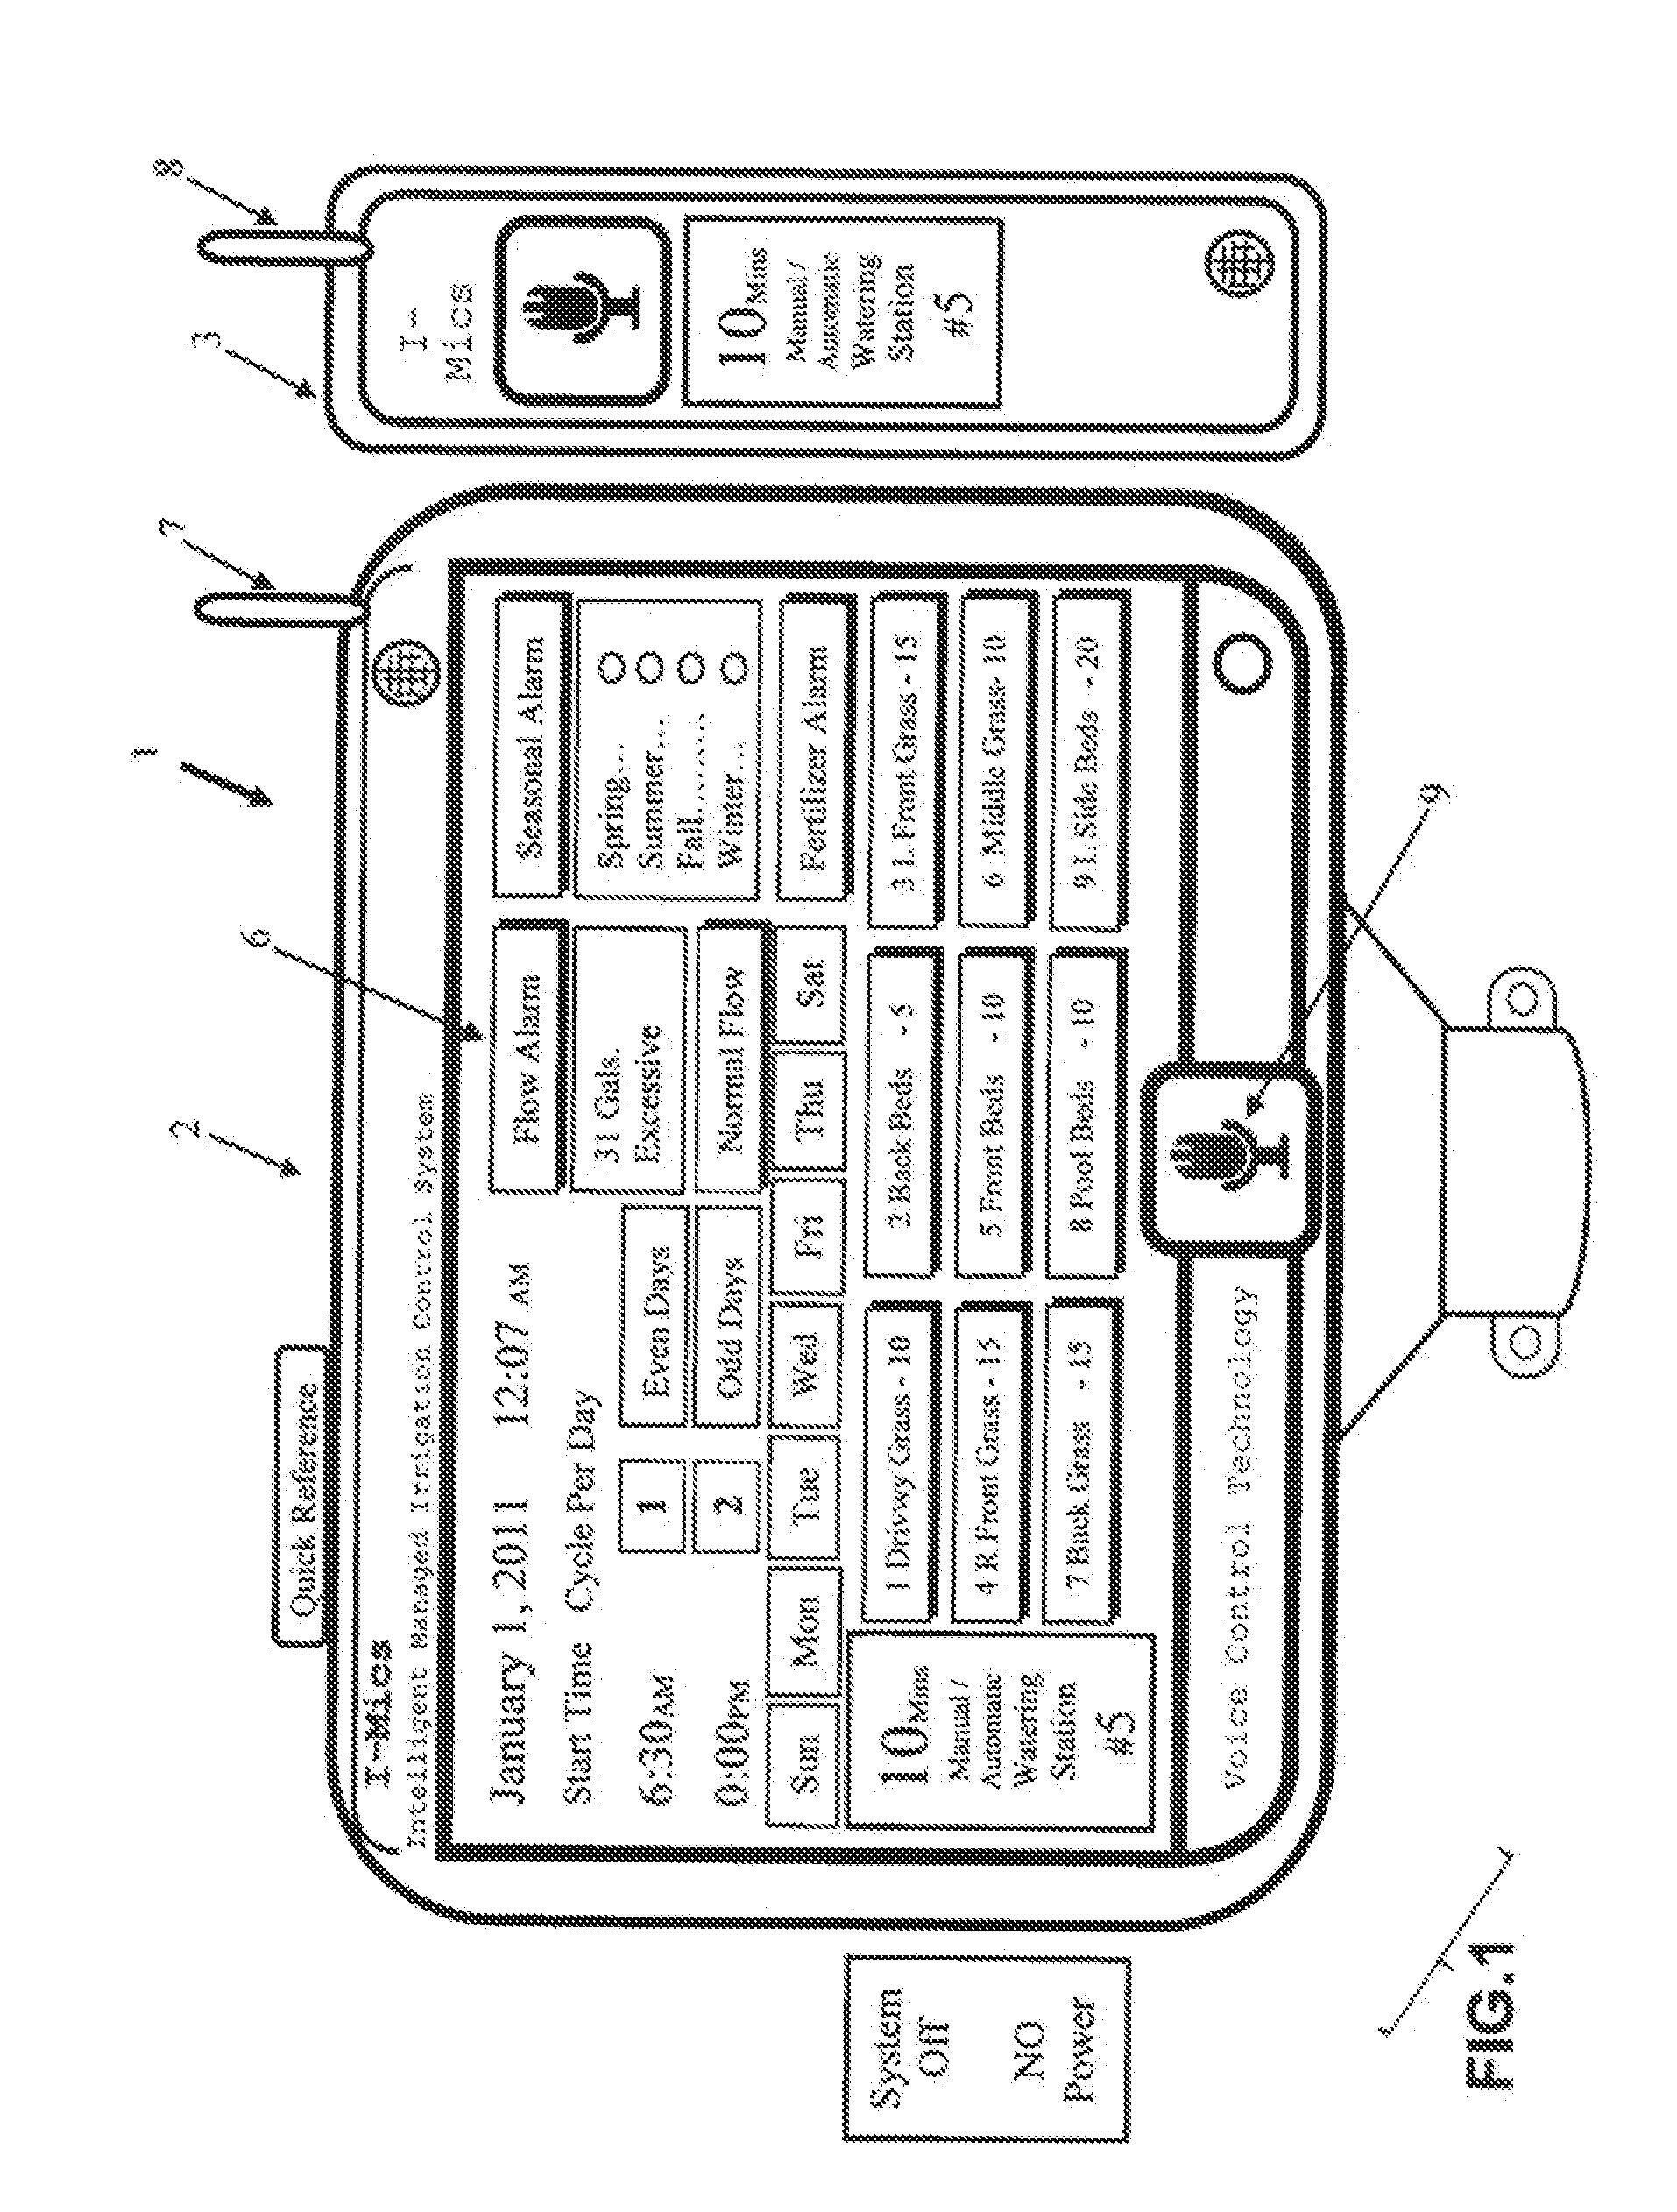 Programmable intelligent control method of and system for irrigation system